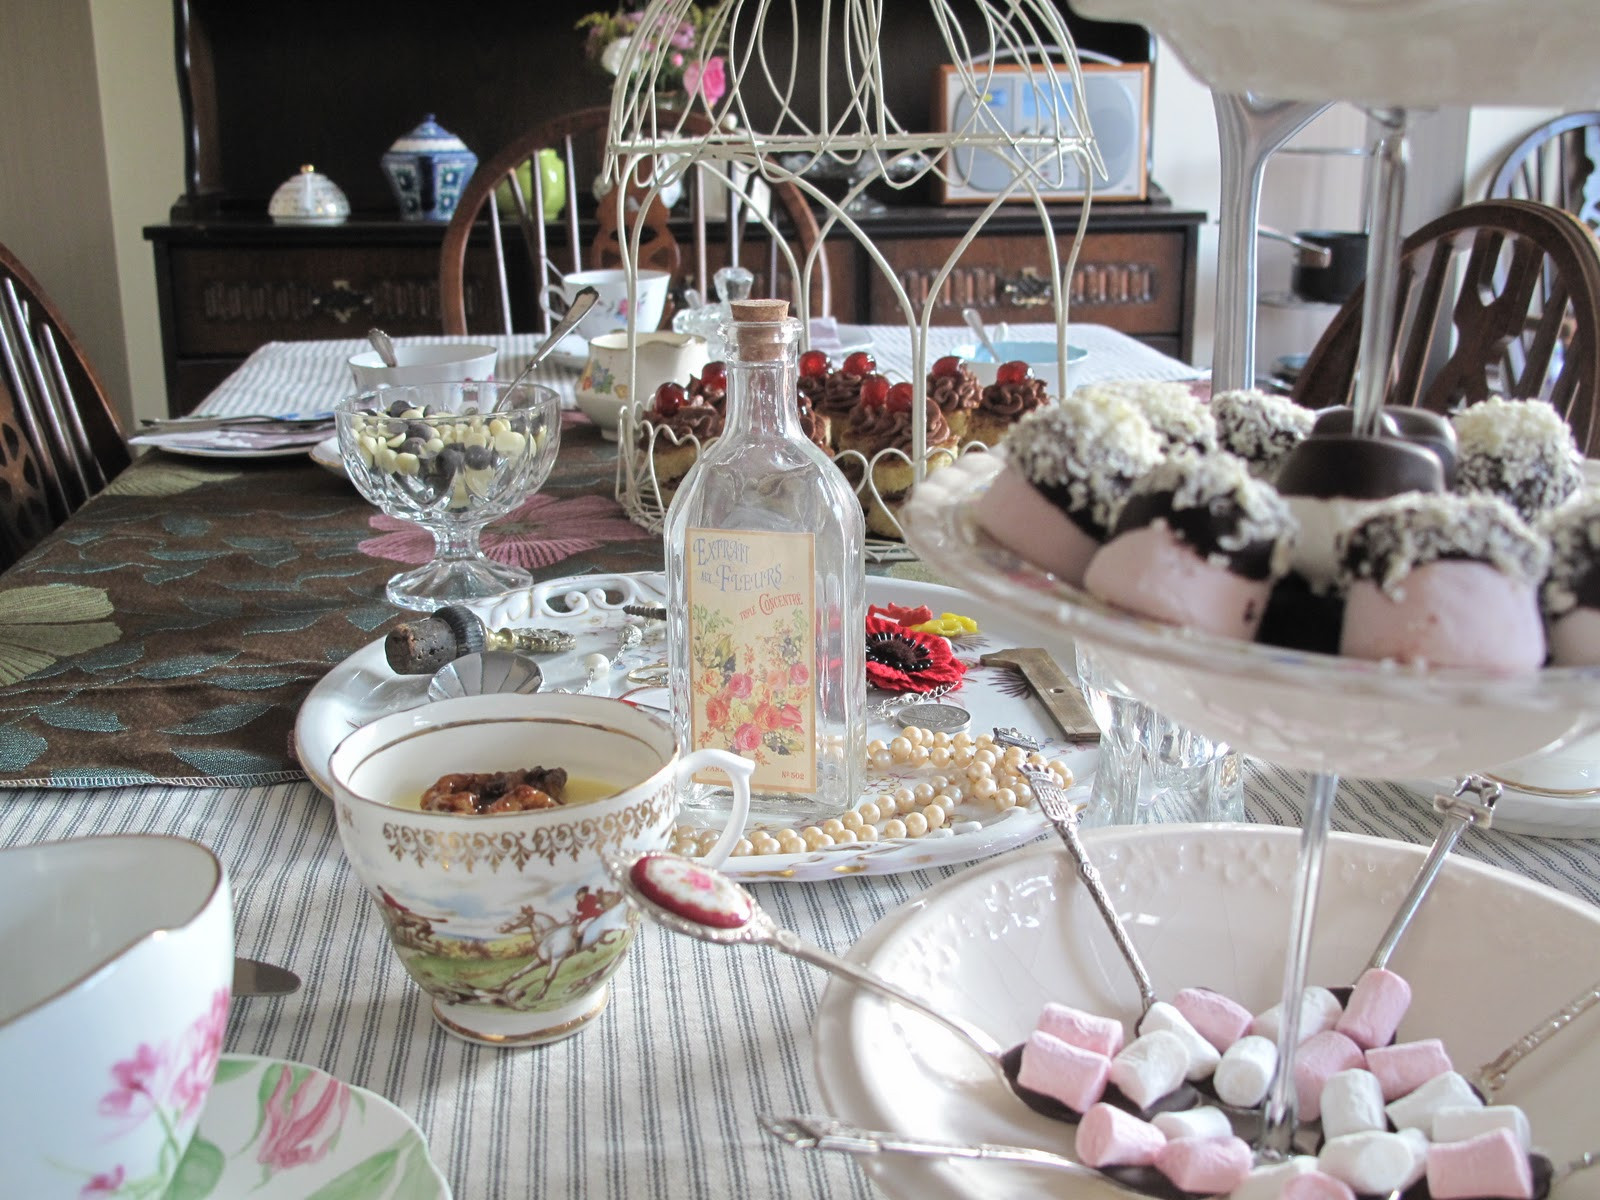 Vintage Tea Party Birthday Ideas
 The Secluded Tea Party A Midnight Feast Tea Party with